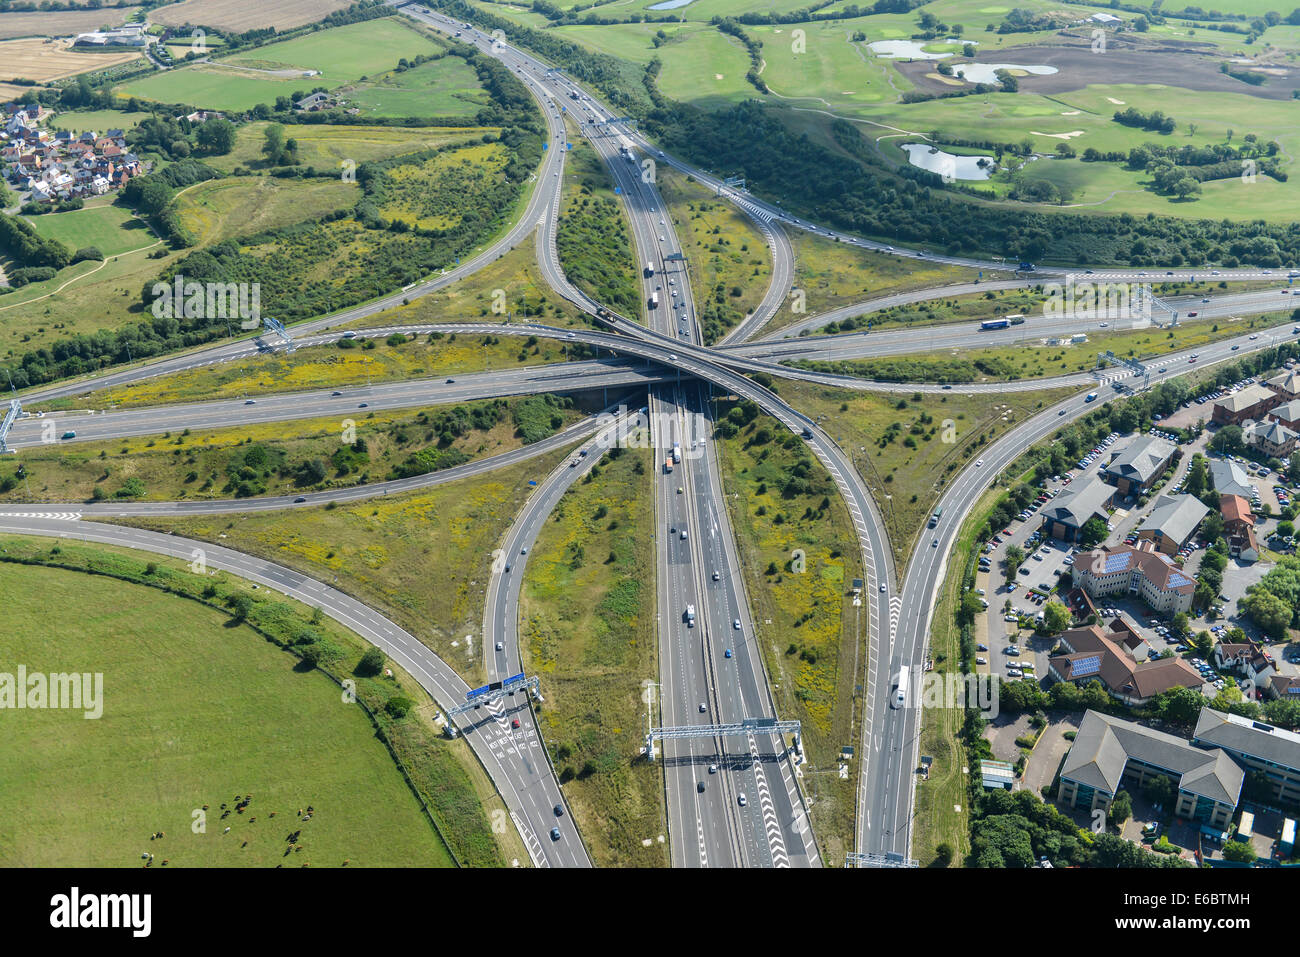 An aerial view of the Almondsbury Interchange for the M4 Junction 20 and M5 Junction 15, near Bristol. Stock Photo